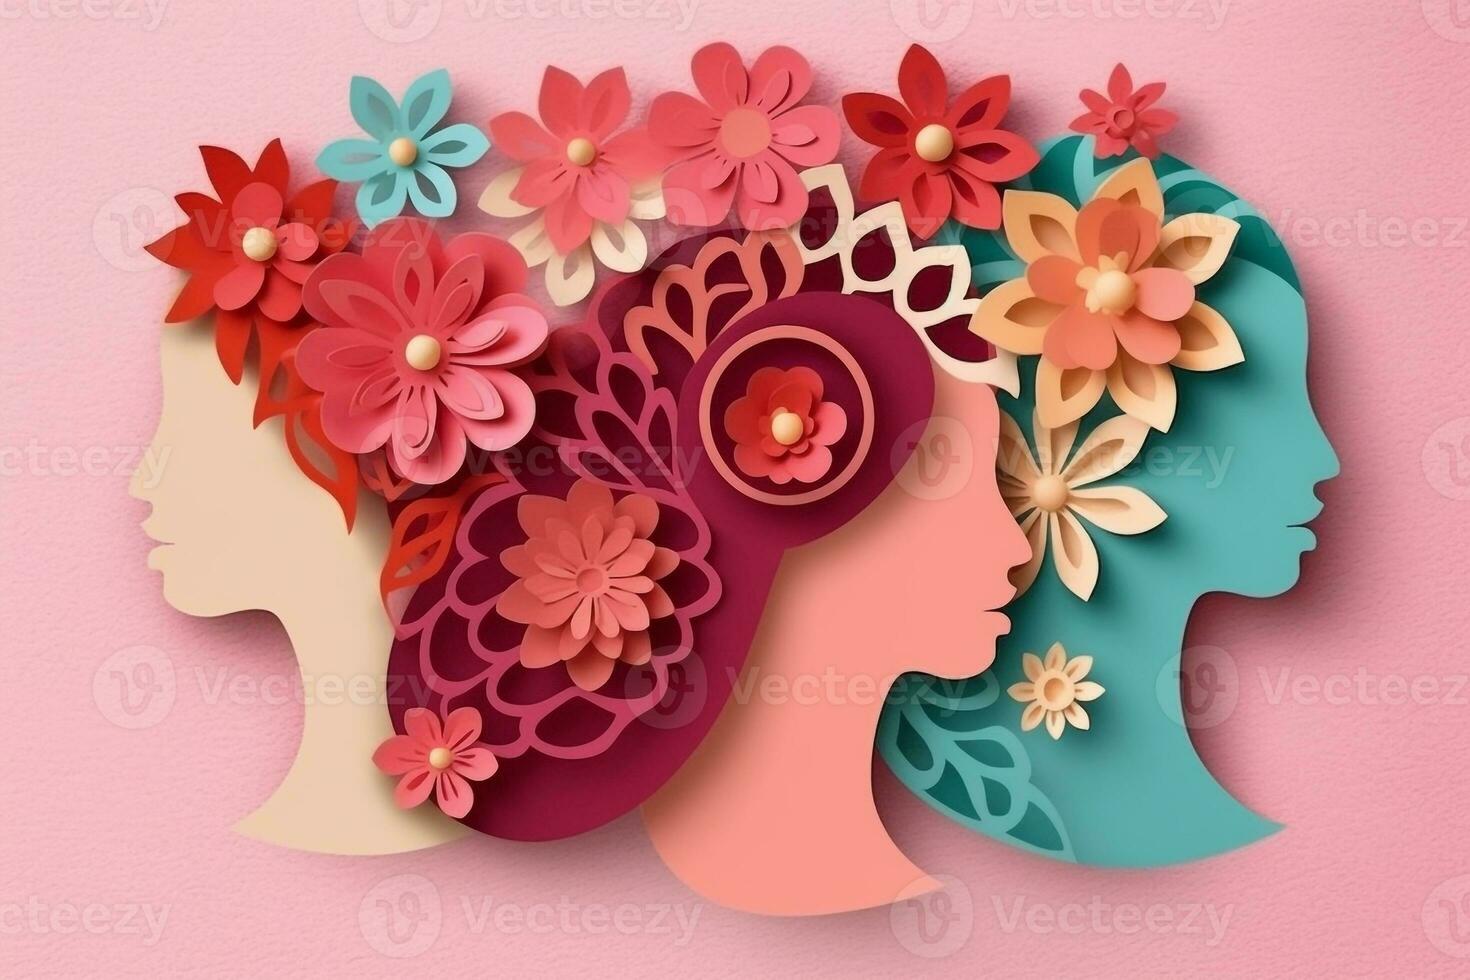 Happy women's day 8 march with beautiful flower paper craft,Paper cut style photo